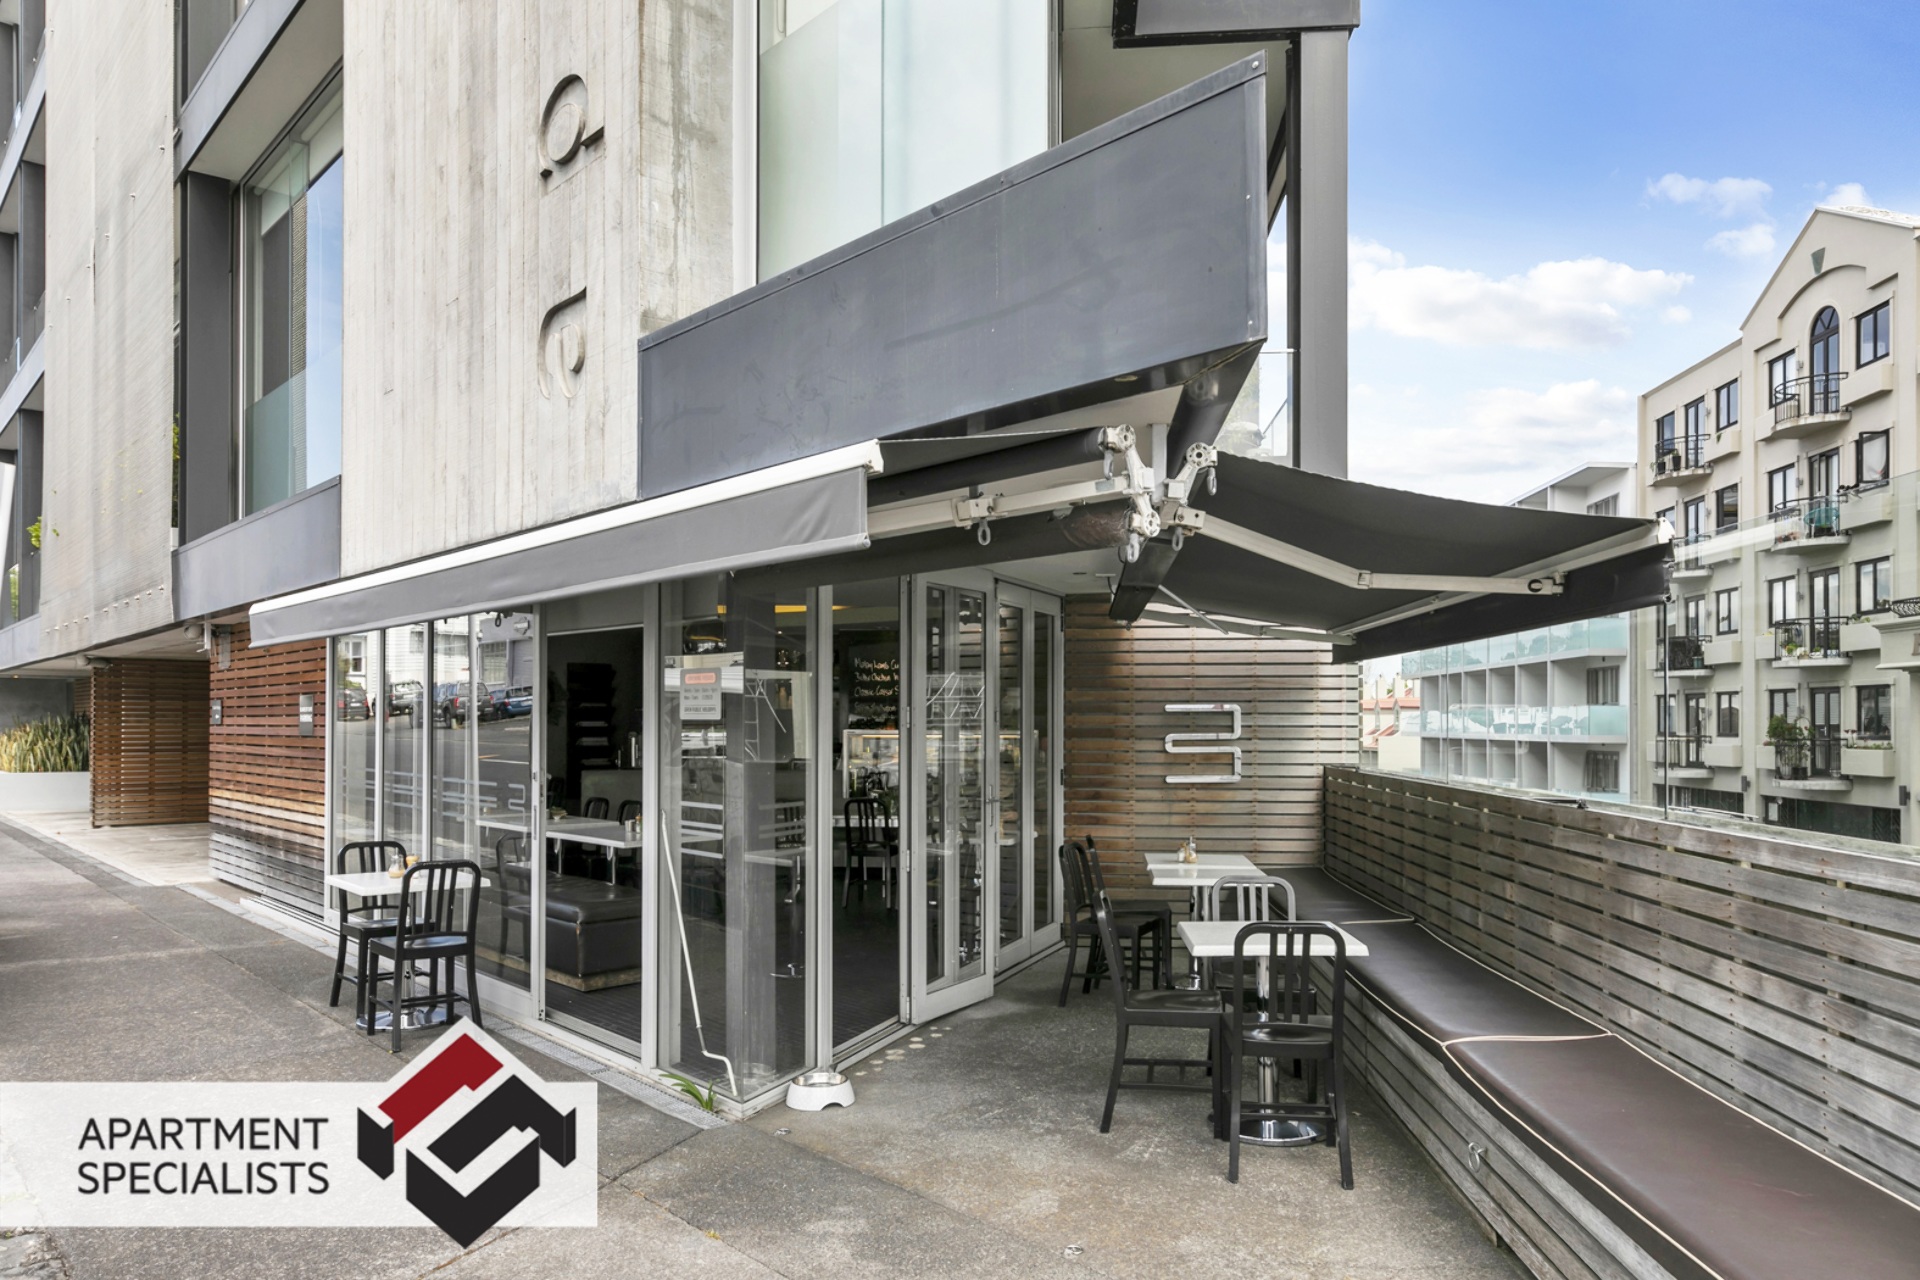 15 | 15 Blake Street, Ponsonby | Apartment Specialists